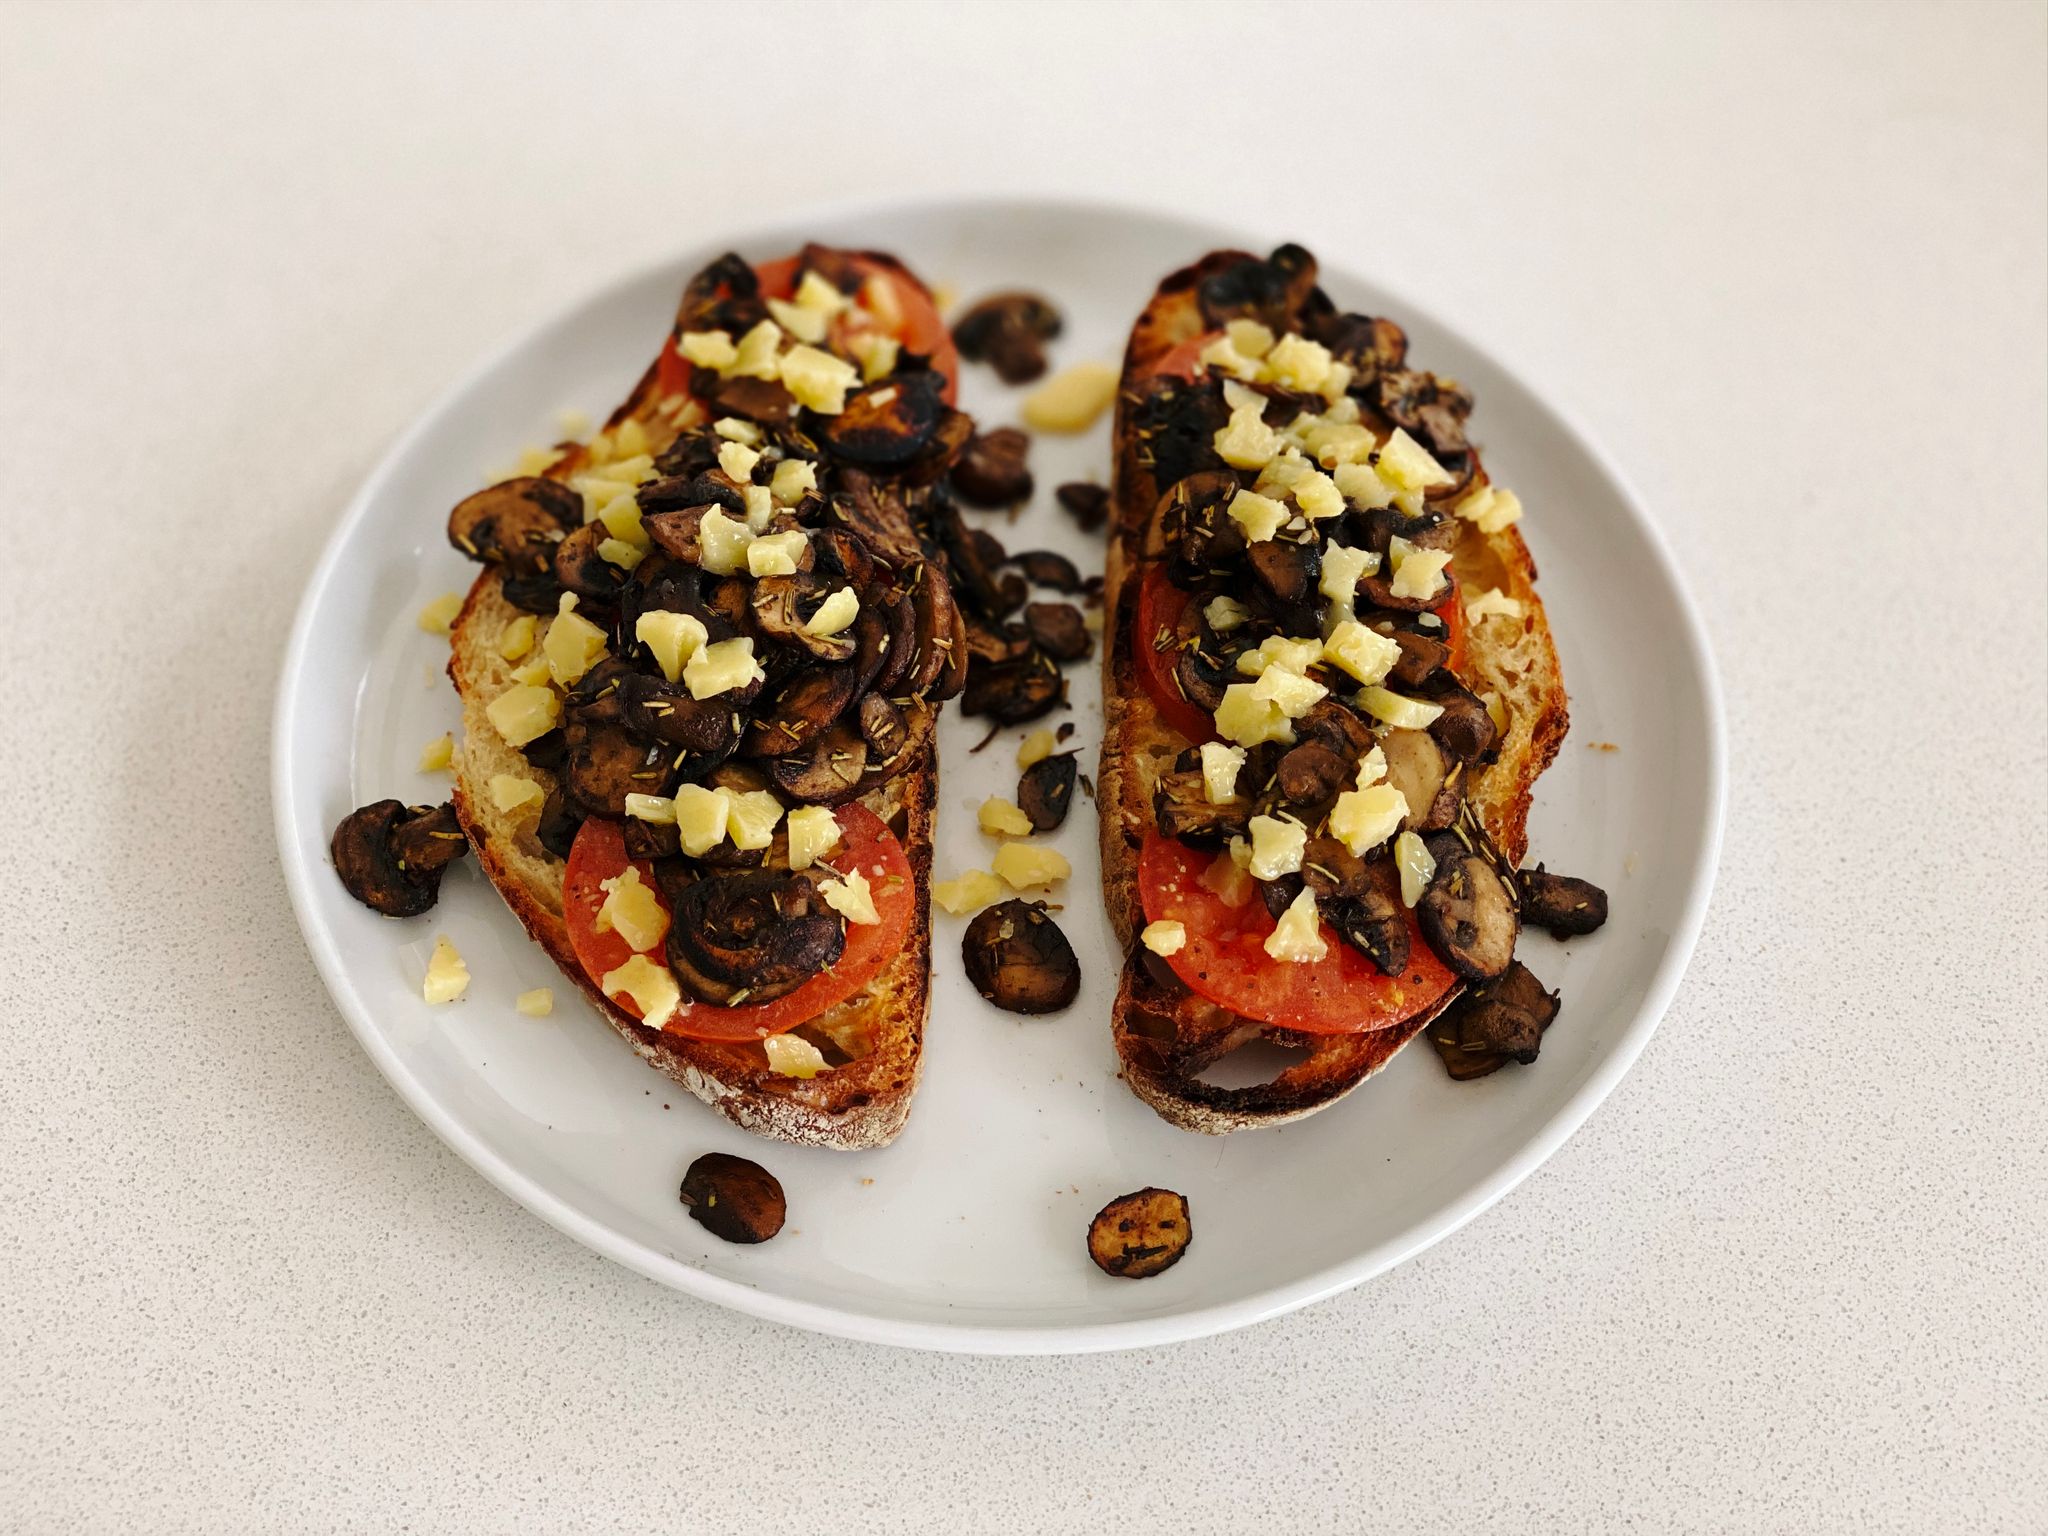 A photo of two pieces of toast sitting on a plate, with cooked tomato and mushrooms on top, and crumbled cheddar cheese on top of that.